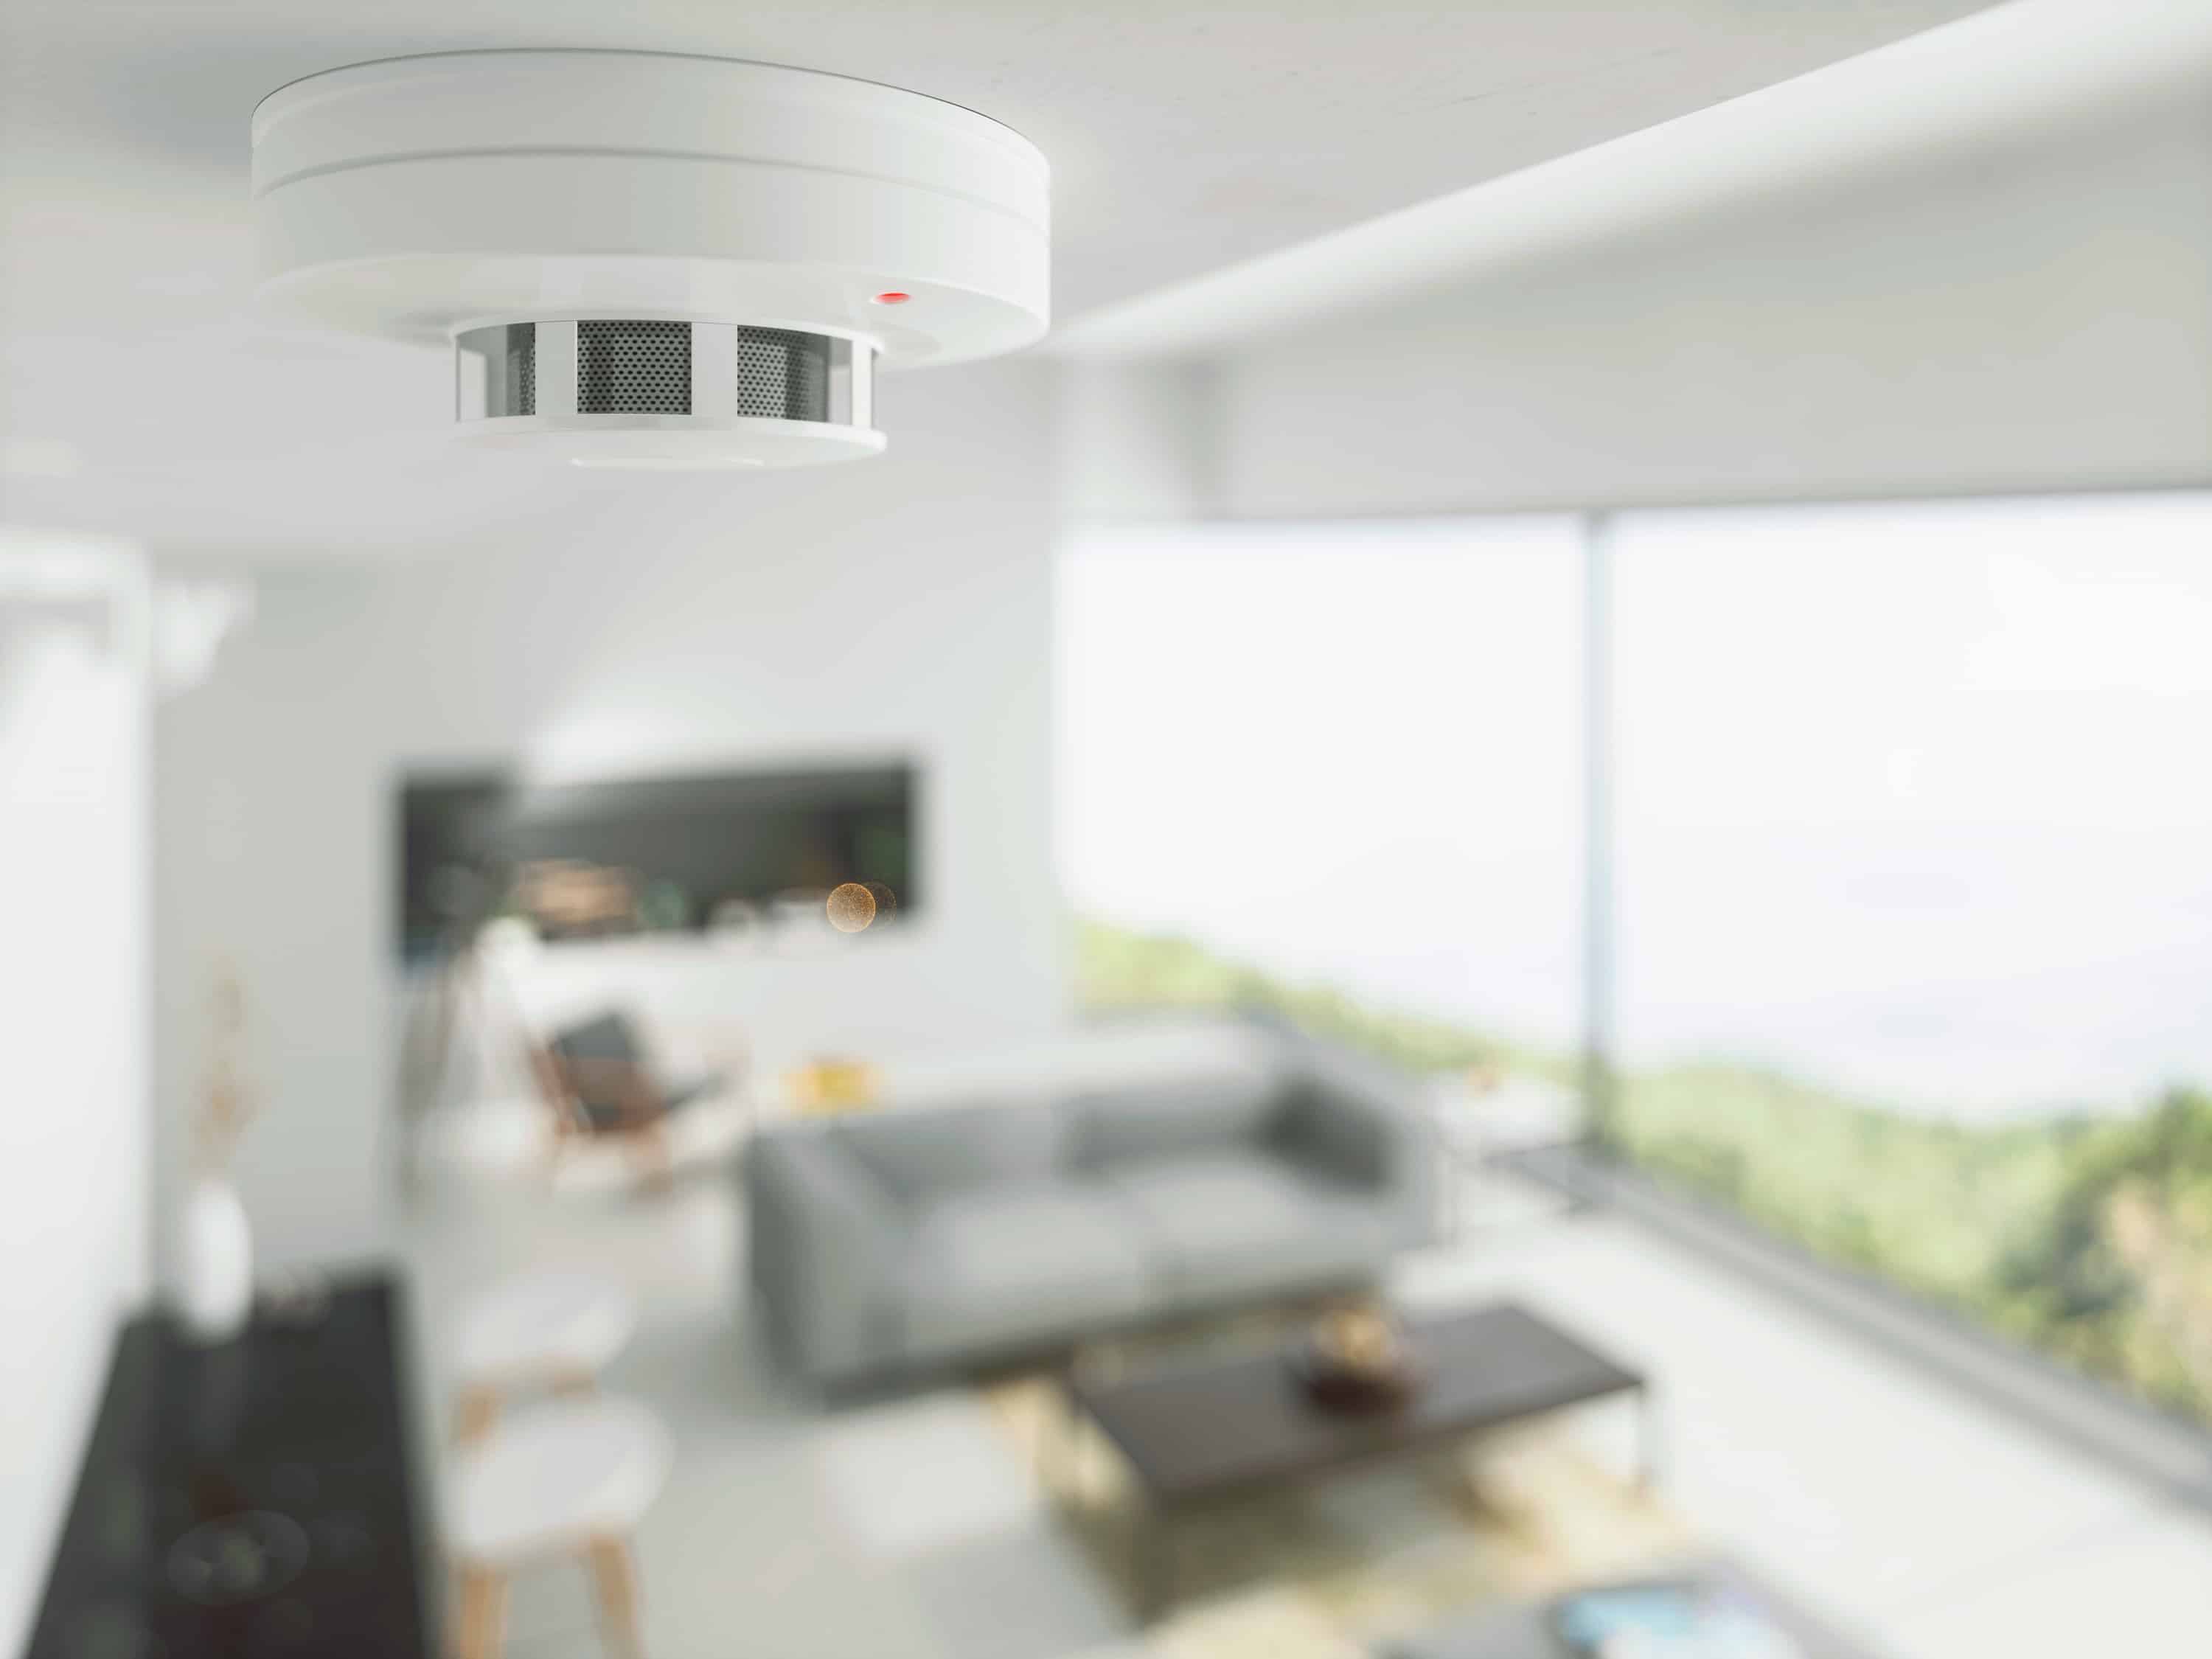 Keeping Safe with Smoke and CO Alarms in Short-Term Rentals